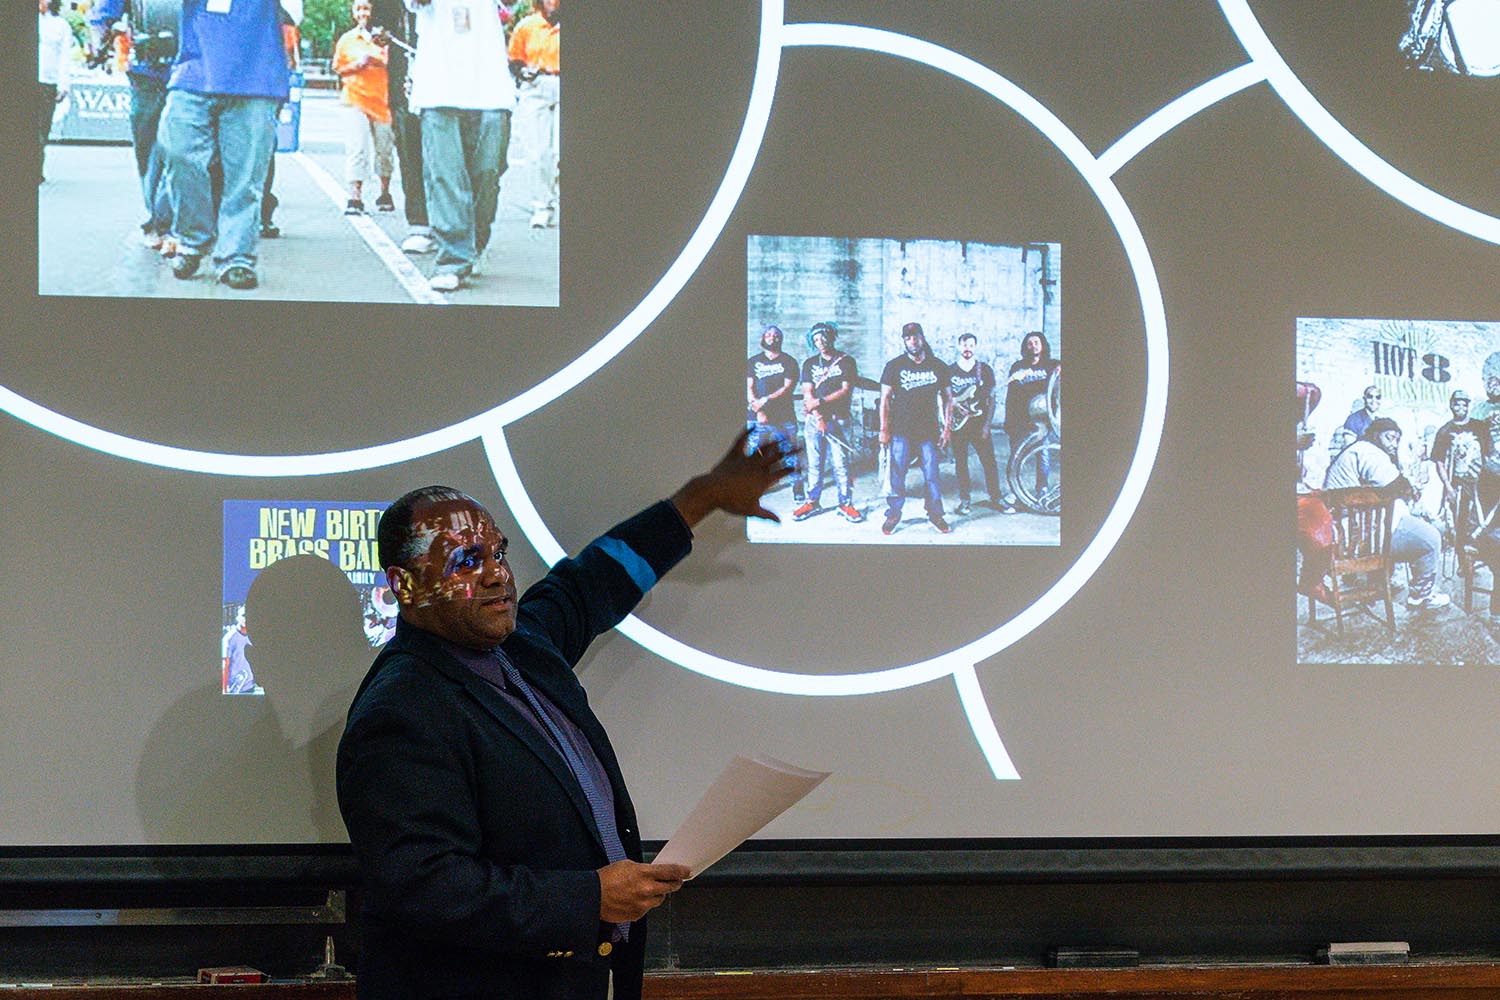 McNeil explained how the institution of the Black New Orleans brass band represents a genealogic continuum that extends back to the arrival of the first enslaved Africans to the Louisiana Territory. "This continuum connects a violent past, marked by physical abuse of black bodies in the form of institutionalized slavery, to a violent present confounded by systemic poverty, social injustice, and police brutality," he said. In spite of extreme oppression, the brass band community continues to enrich and enliven both local communities through their iconic musical offerings.